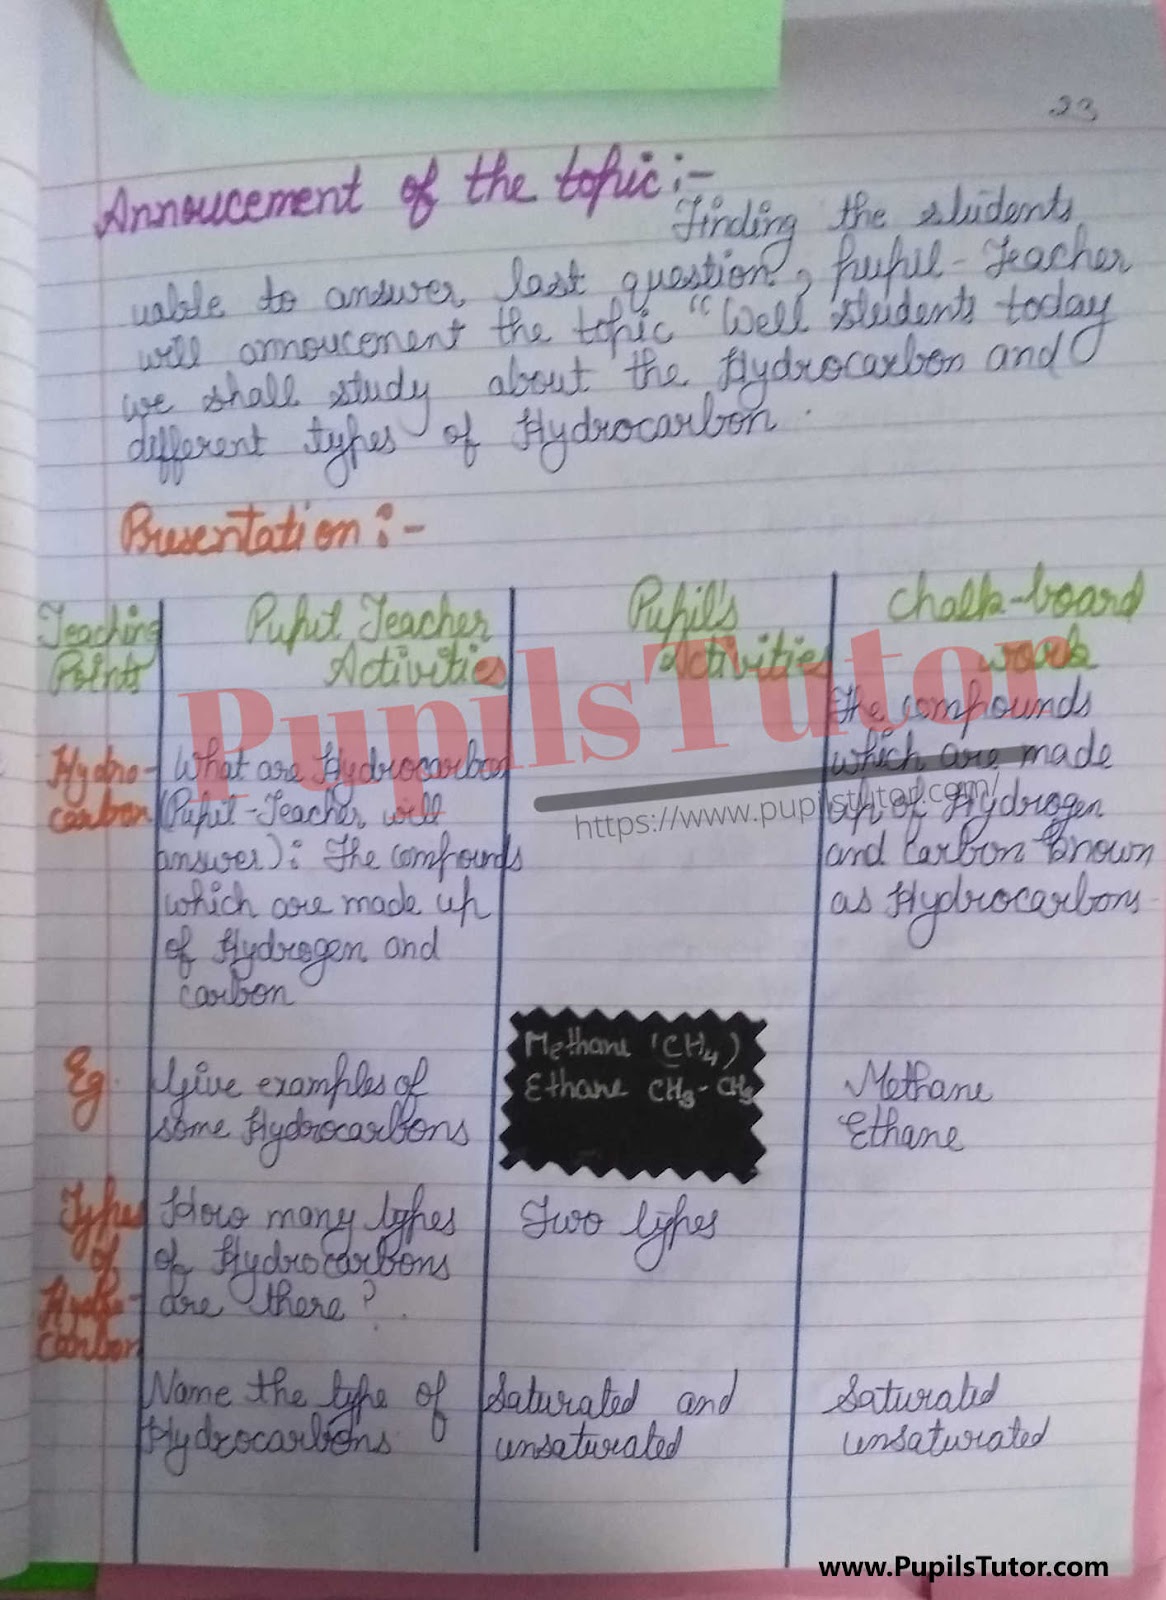 (Science) Chemistry Lesson Plan On Hydrocarbons For Class/Grade 11 For CBSE NCERT School And College Teachers  – (Page And Image Number 3) – www.pupilstutor.com